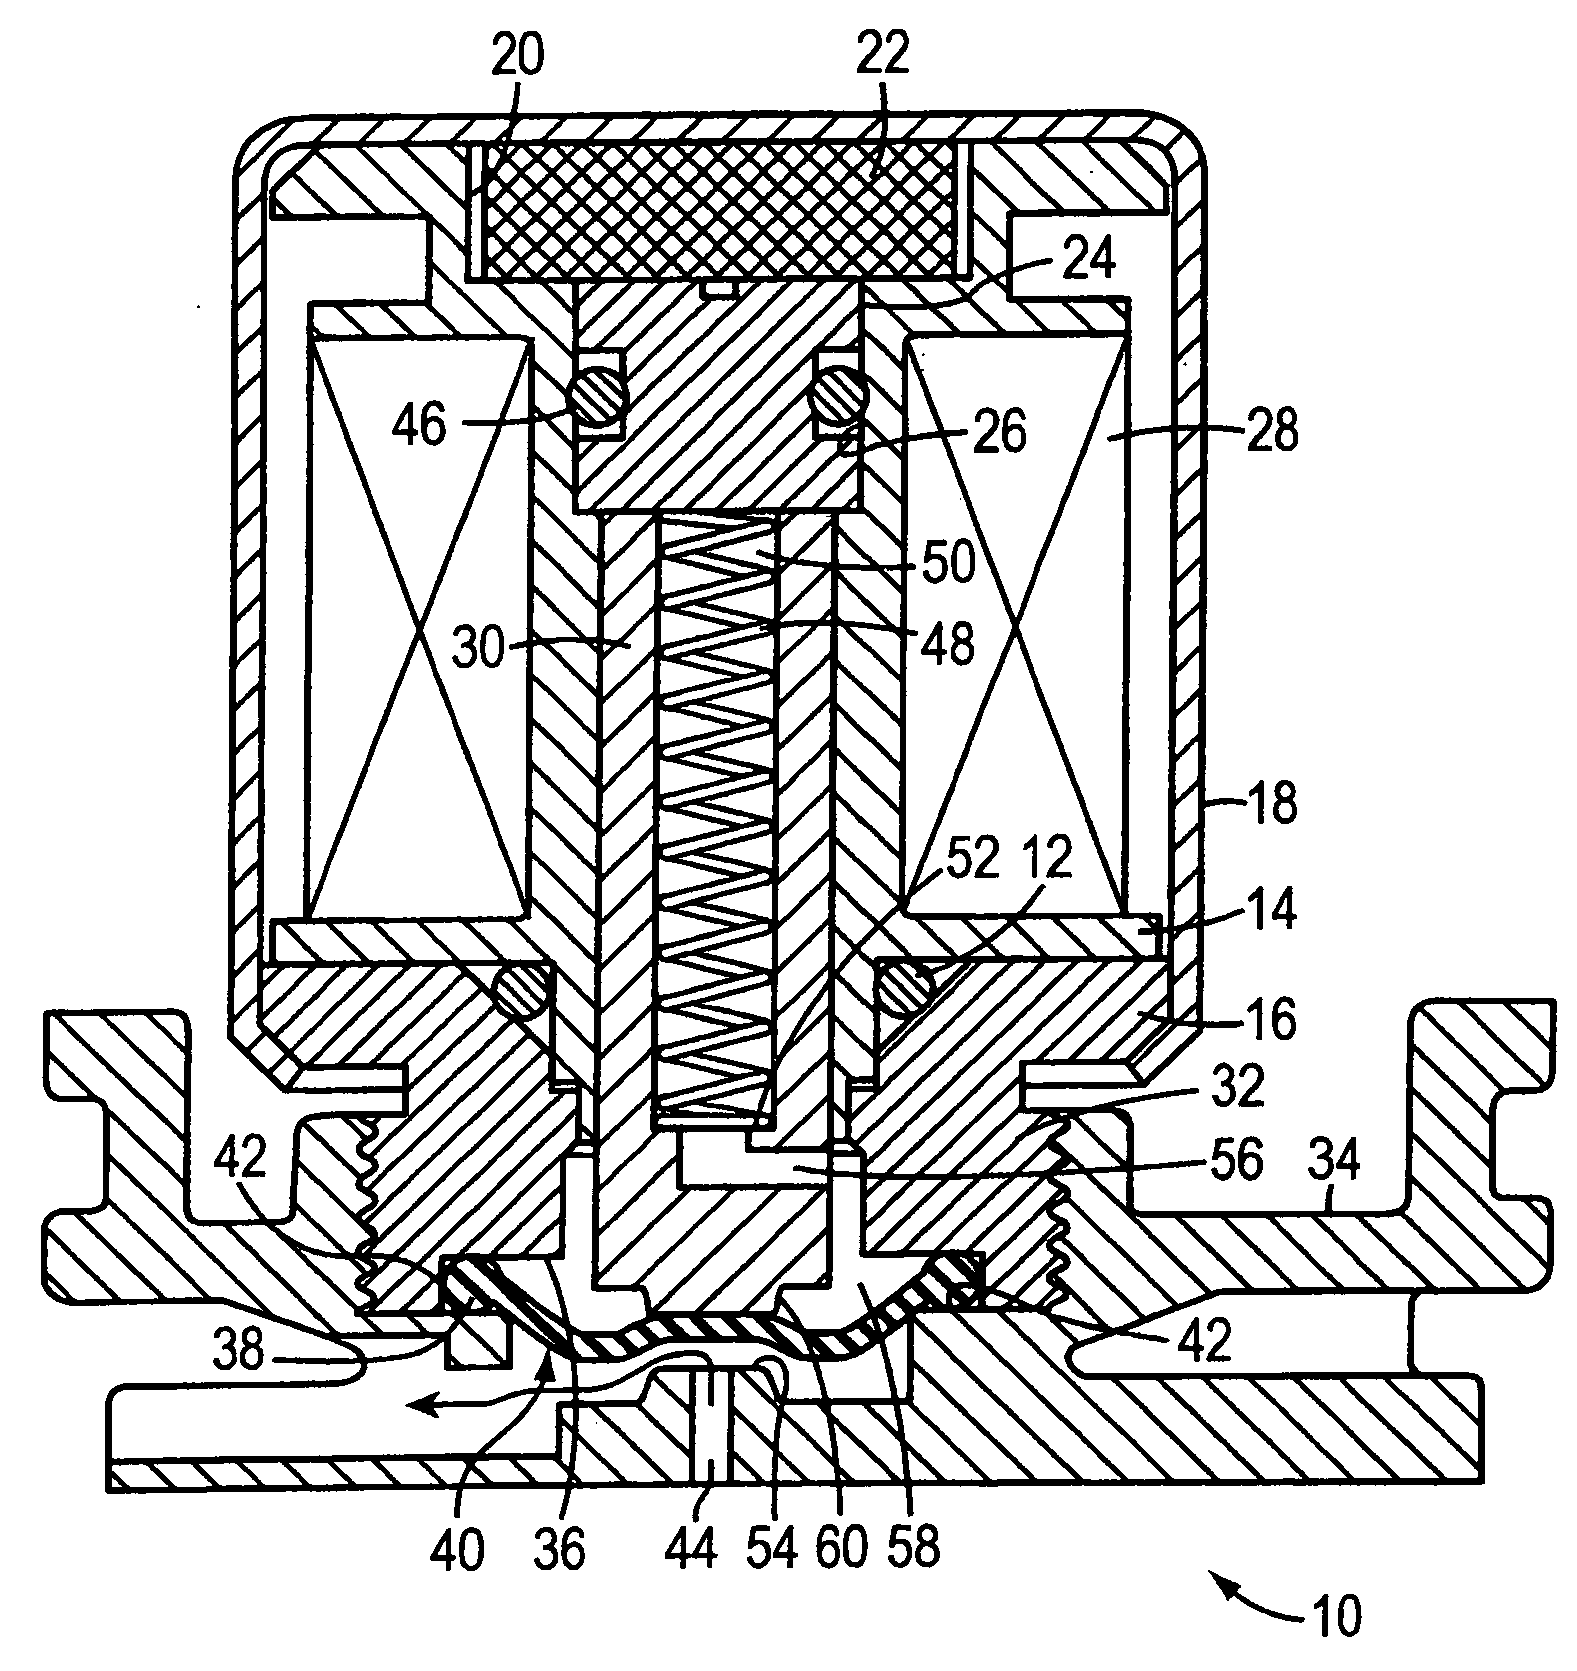 Apparatus and method for controlling fluid flow